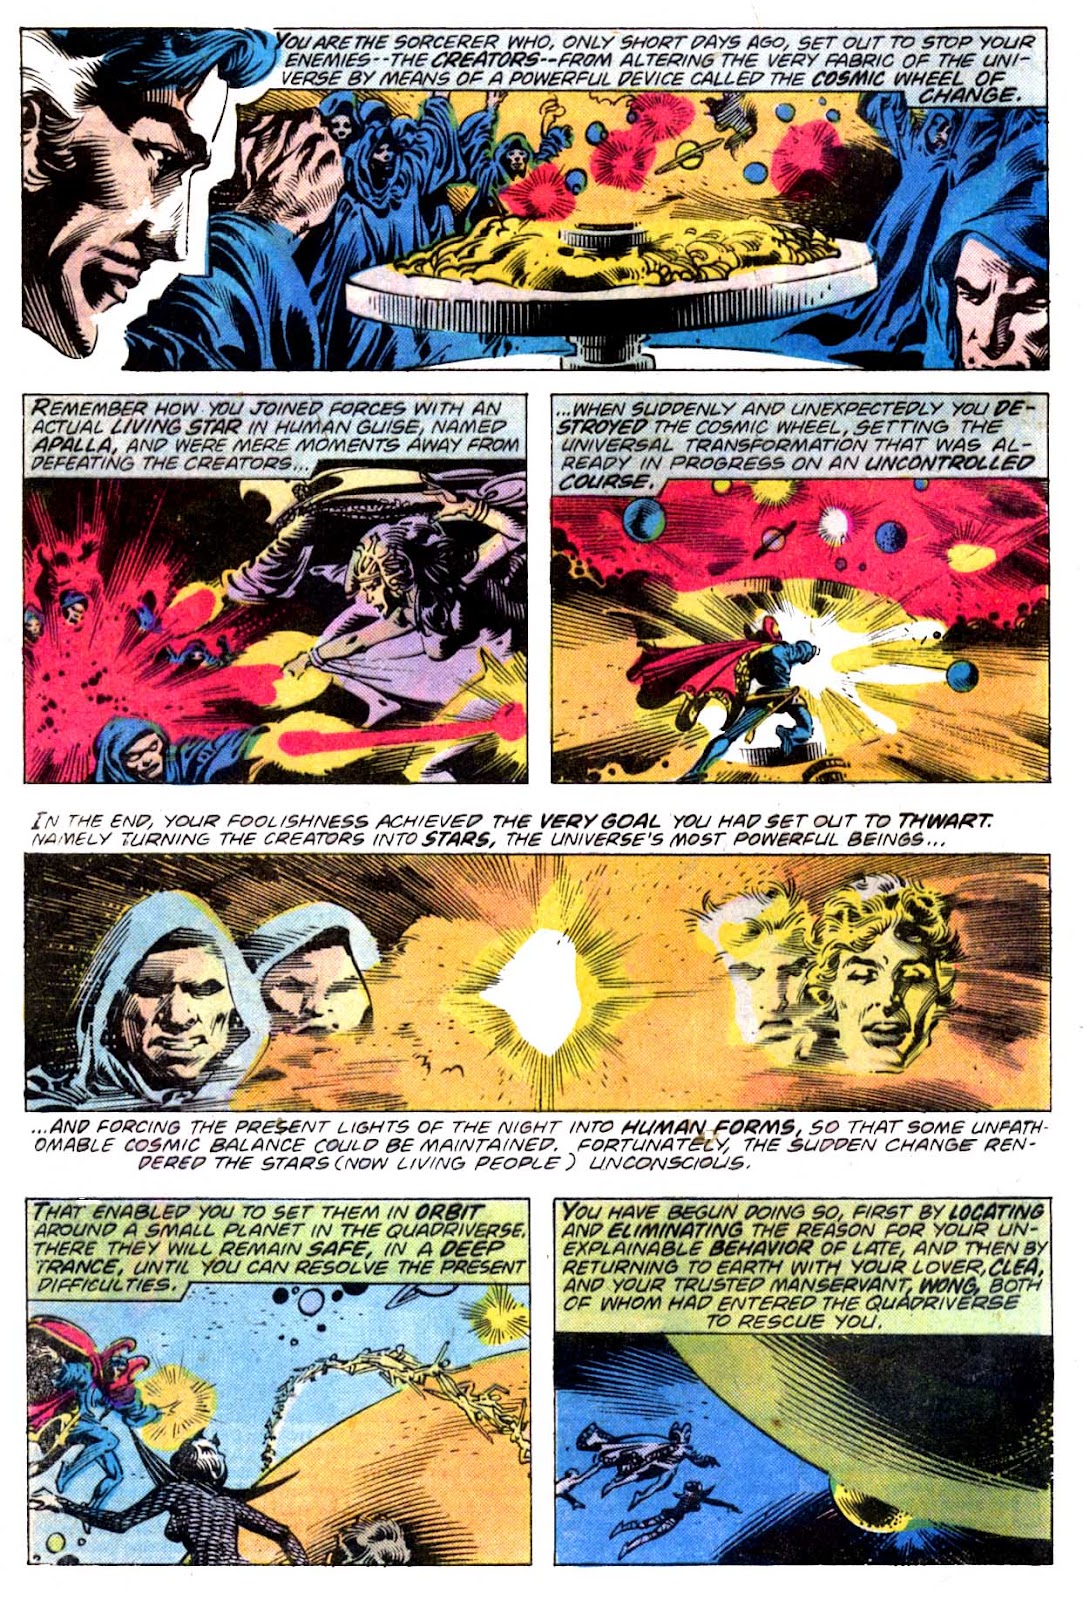 Doctor Strange (1974) issue 26 - Page 3